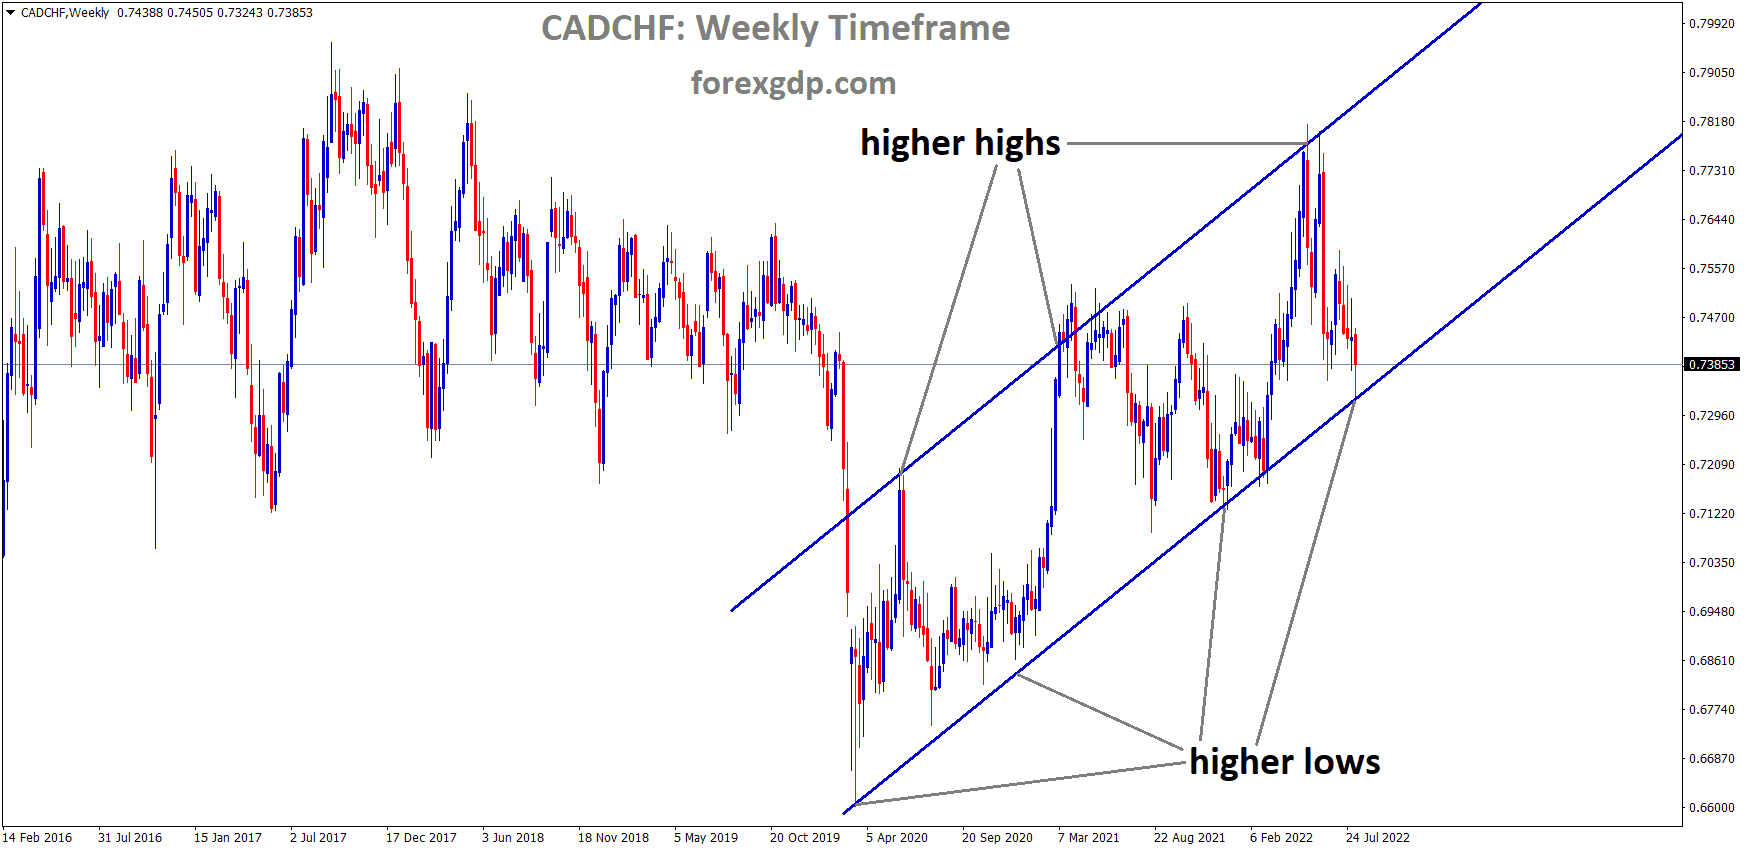 CADCHF is moving in an Ascending channel and the market has rebounded from the higher low area of the channel